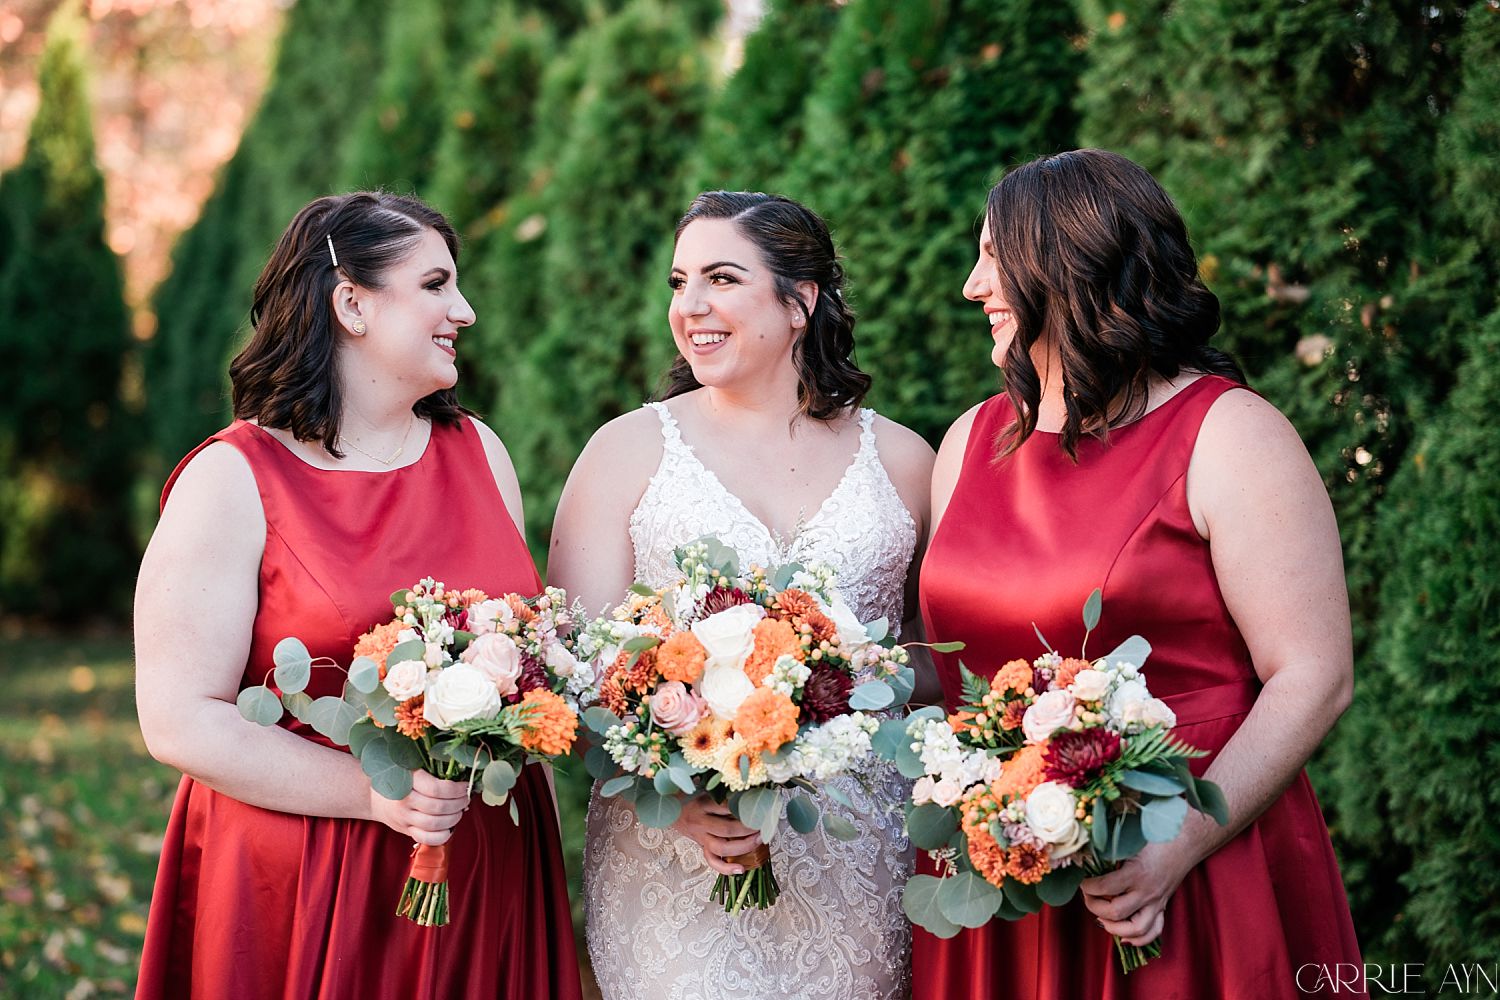 Sequoia Wedding Photographer in Placerville